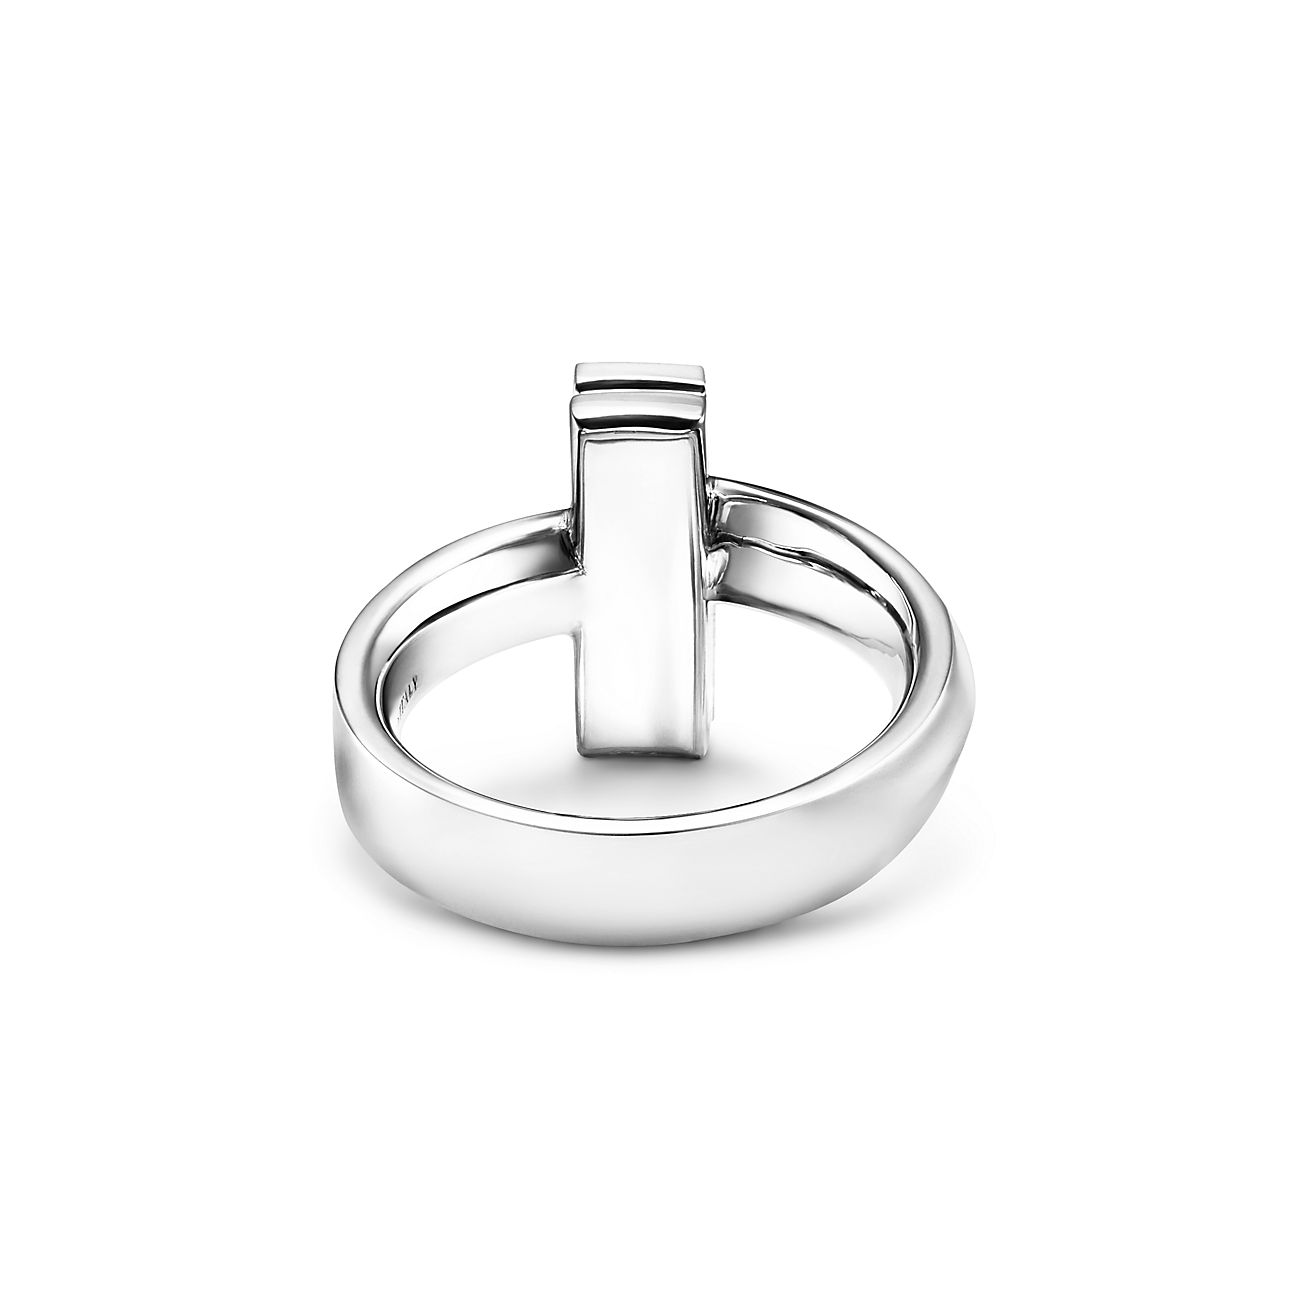 Tiffany T T1 Ring in White Gold, 4.5 mm Wide | Tiffany & Co.